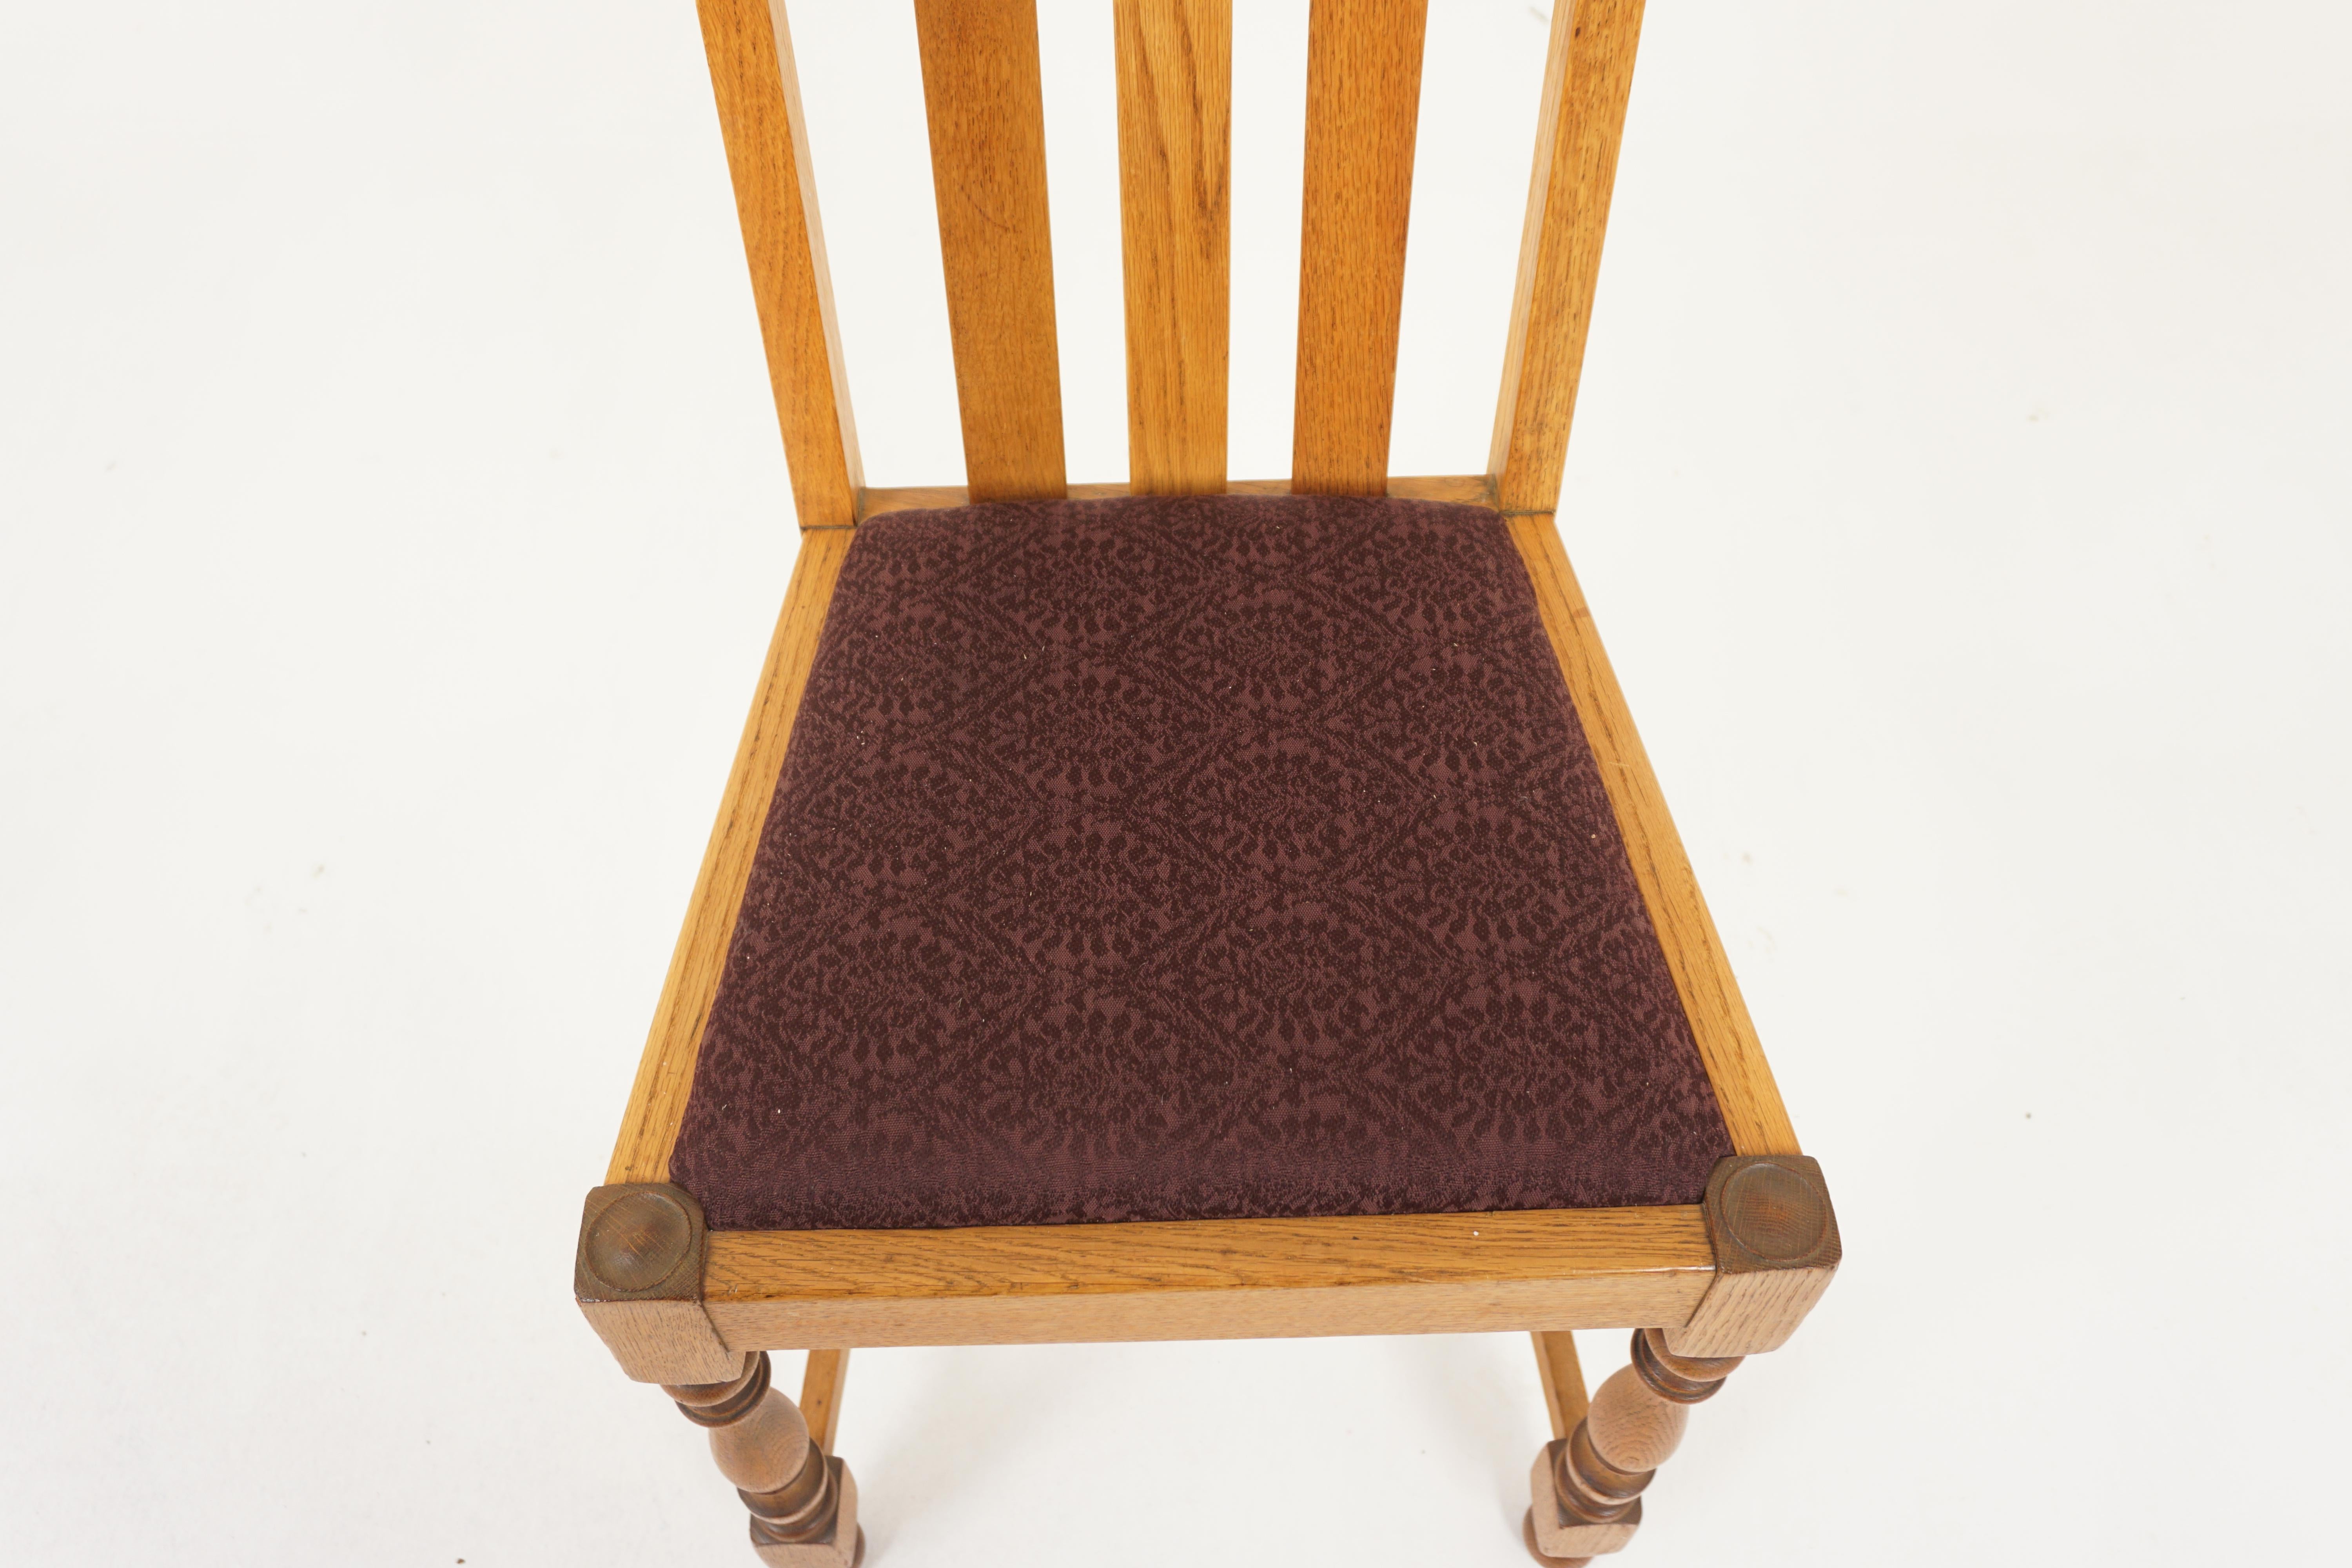 4 Vintage Solid Oak High Back Chairs, Lift Out Seats, Scotland 1920, H1201 In Good Condition For Sale In Vancouver, BC